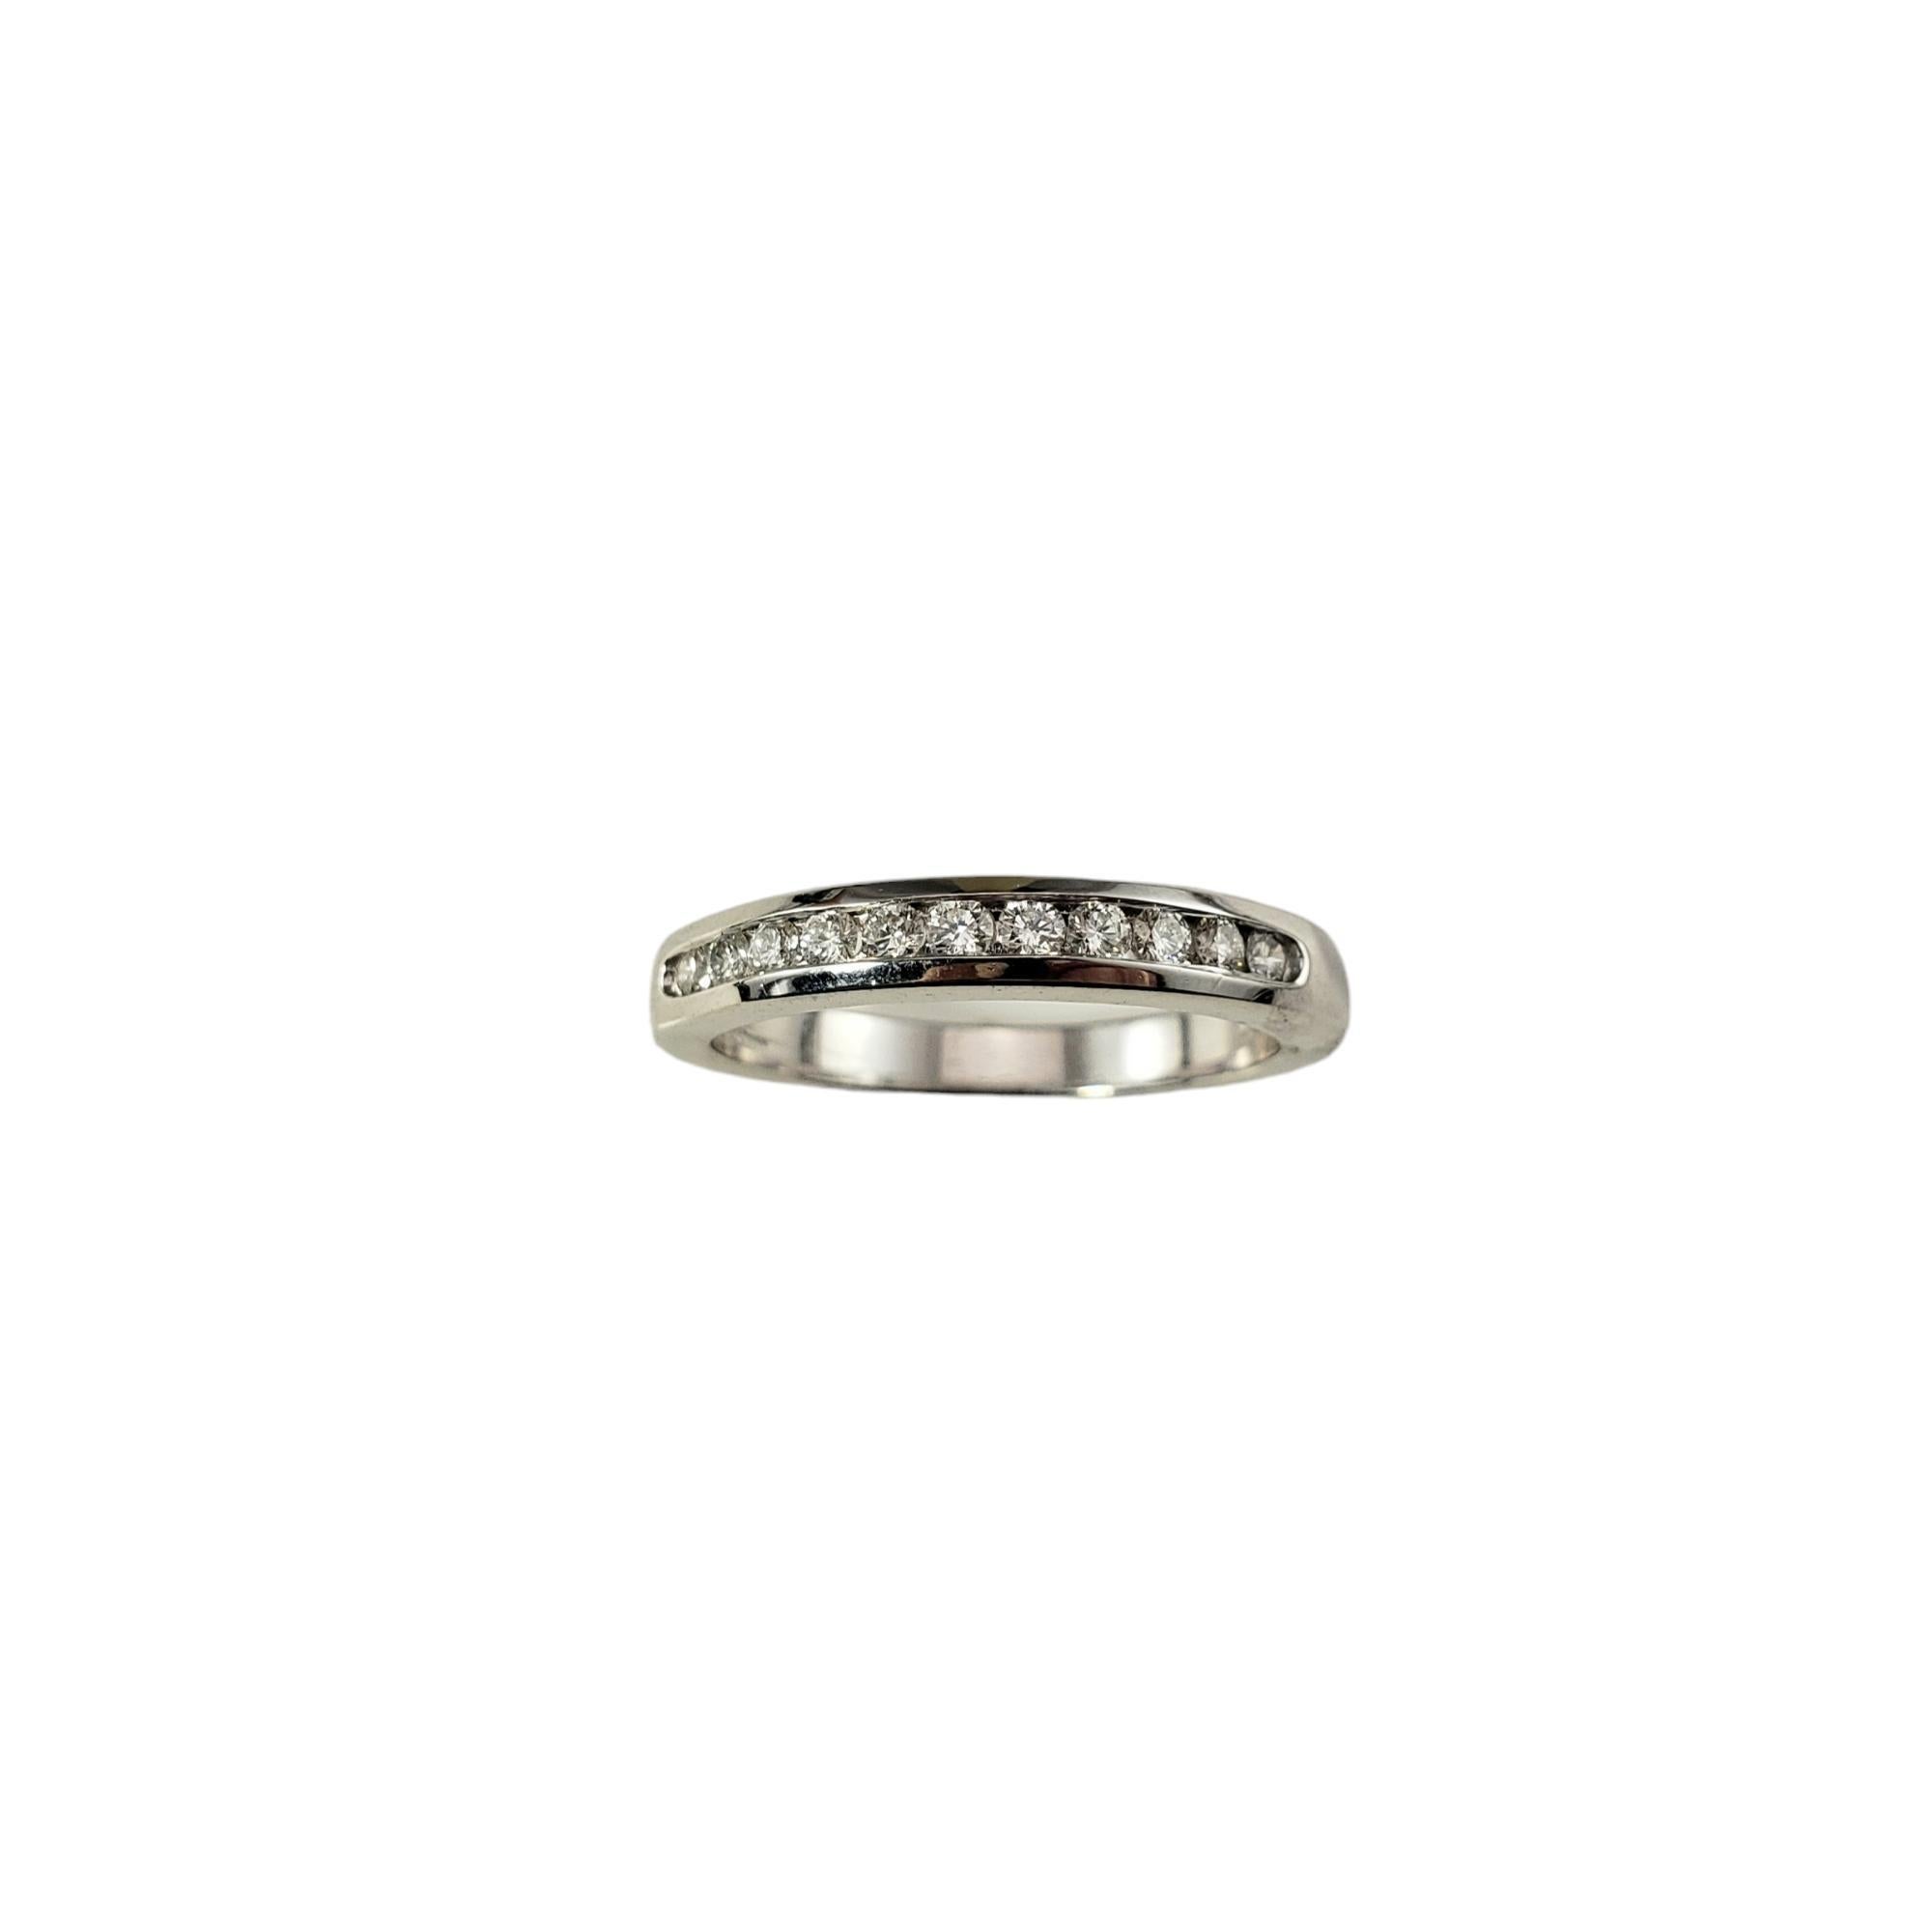 Vintage 14K White Gold Diamond Band Ring Size 6.5-

This sparkling band features 11 round brilliant cut diamonds set in classic 14K white gold.  Width: 3 mm.
Shank: 2.5 mm.

Approximate total diamond weight: .28 ct.

Diamond color: G

Diamond